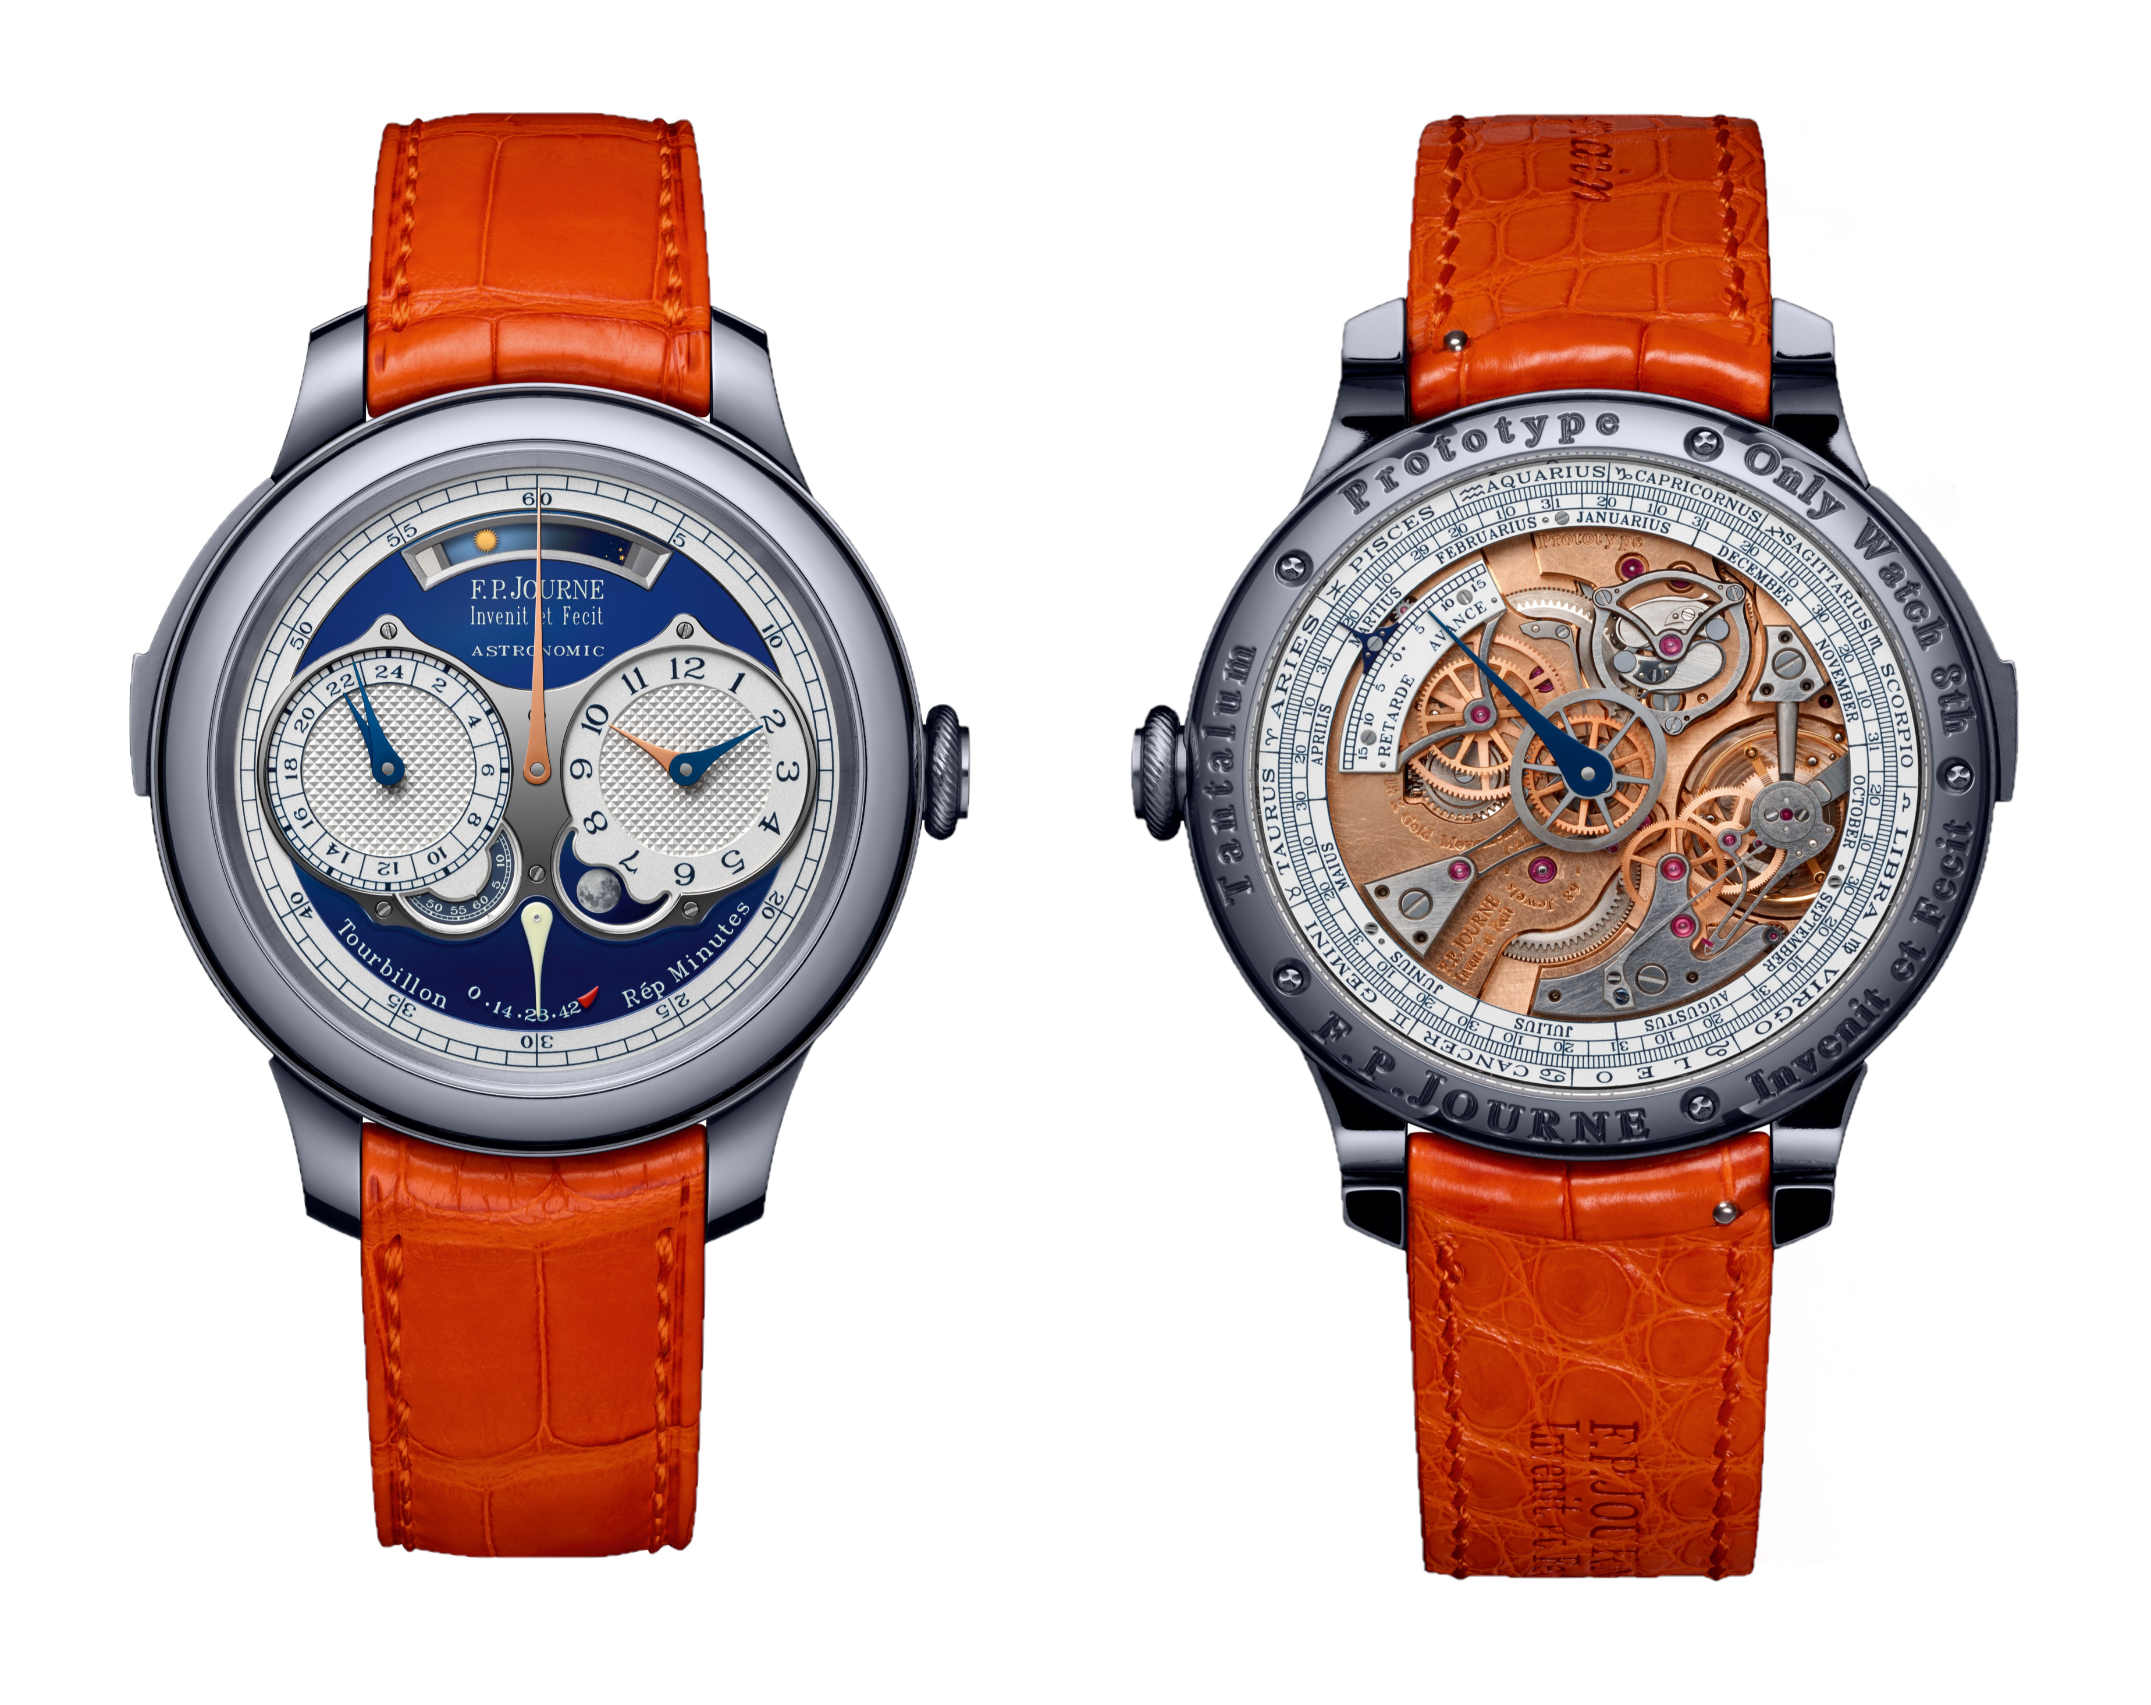 News: The F.P. Journe Only Watch Astronomic Blue